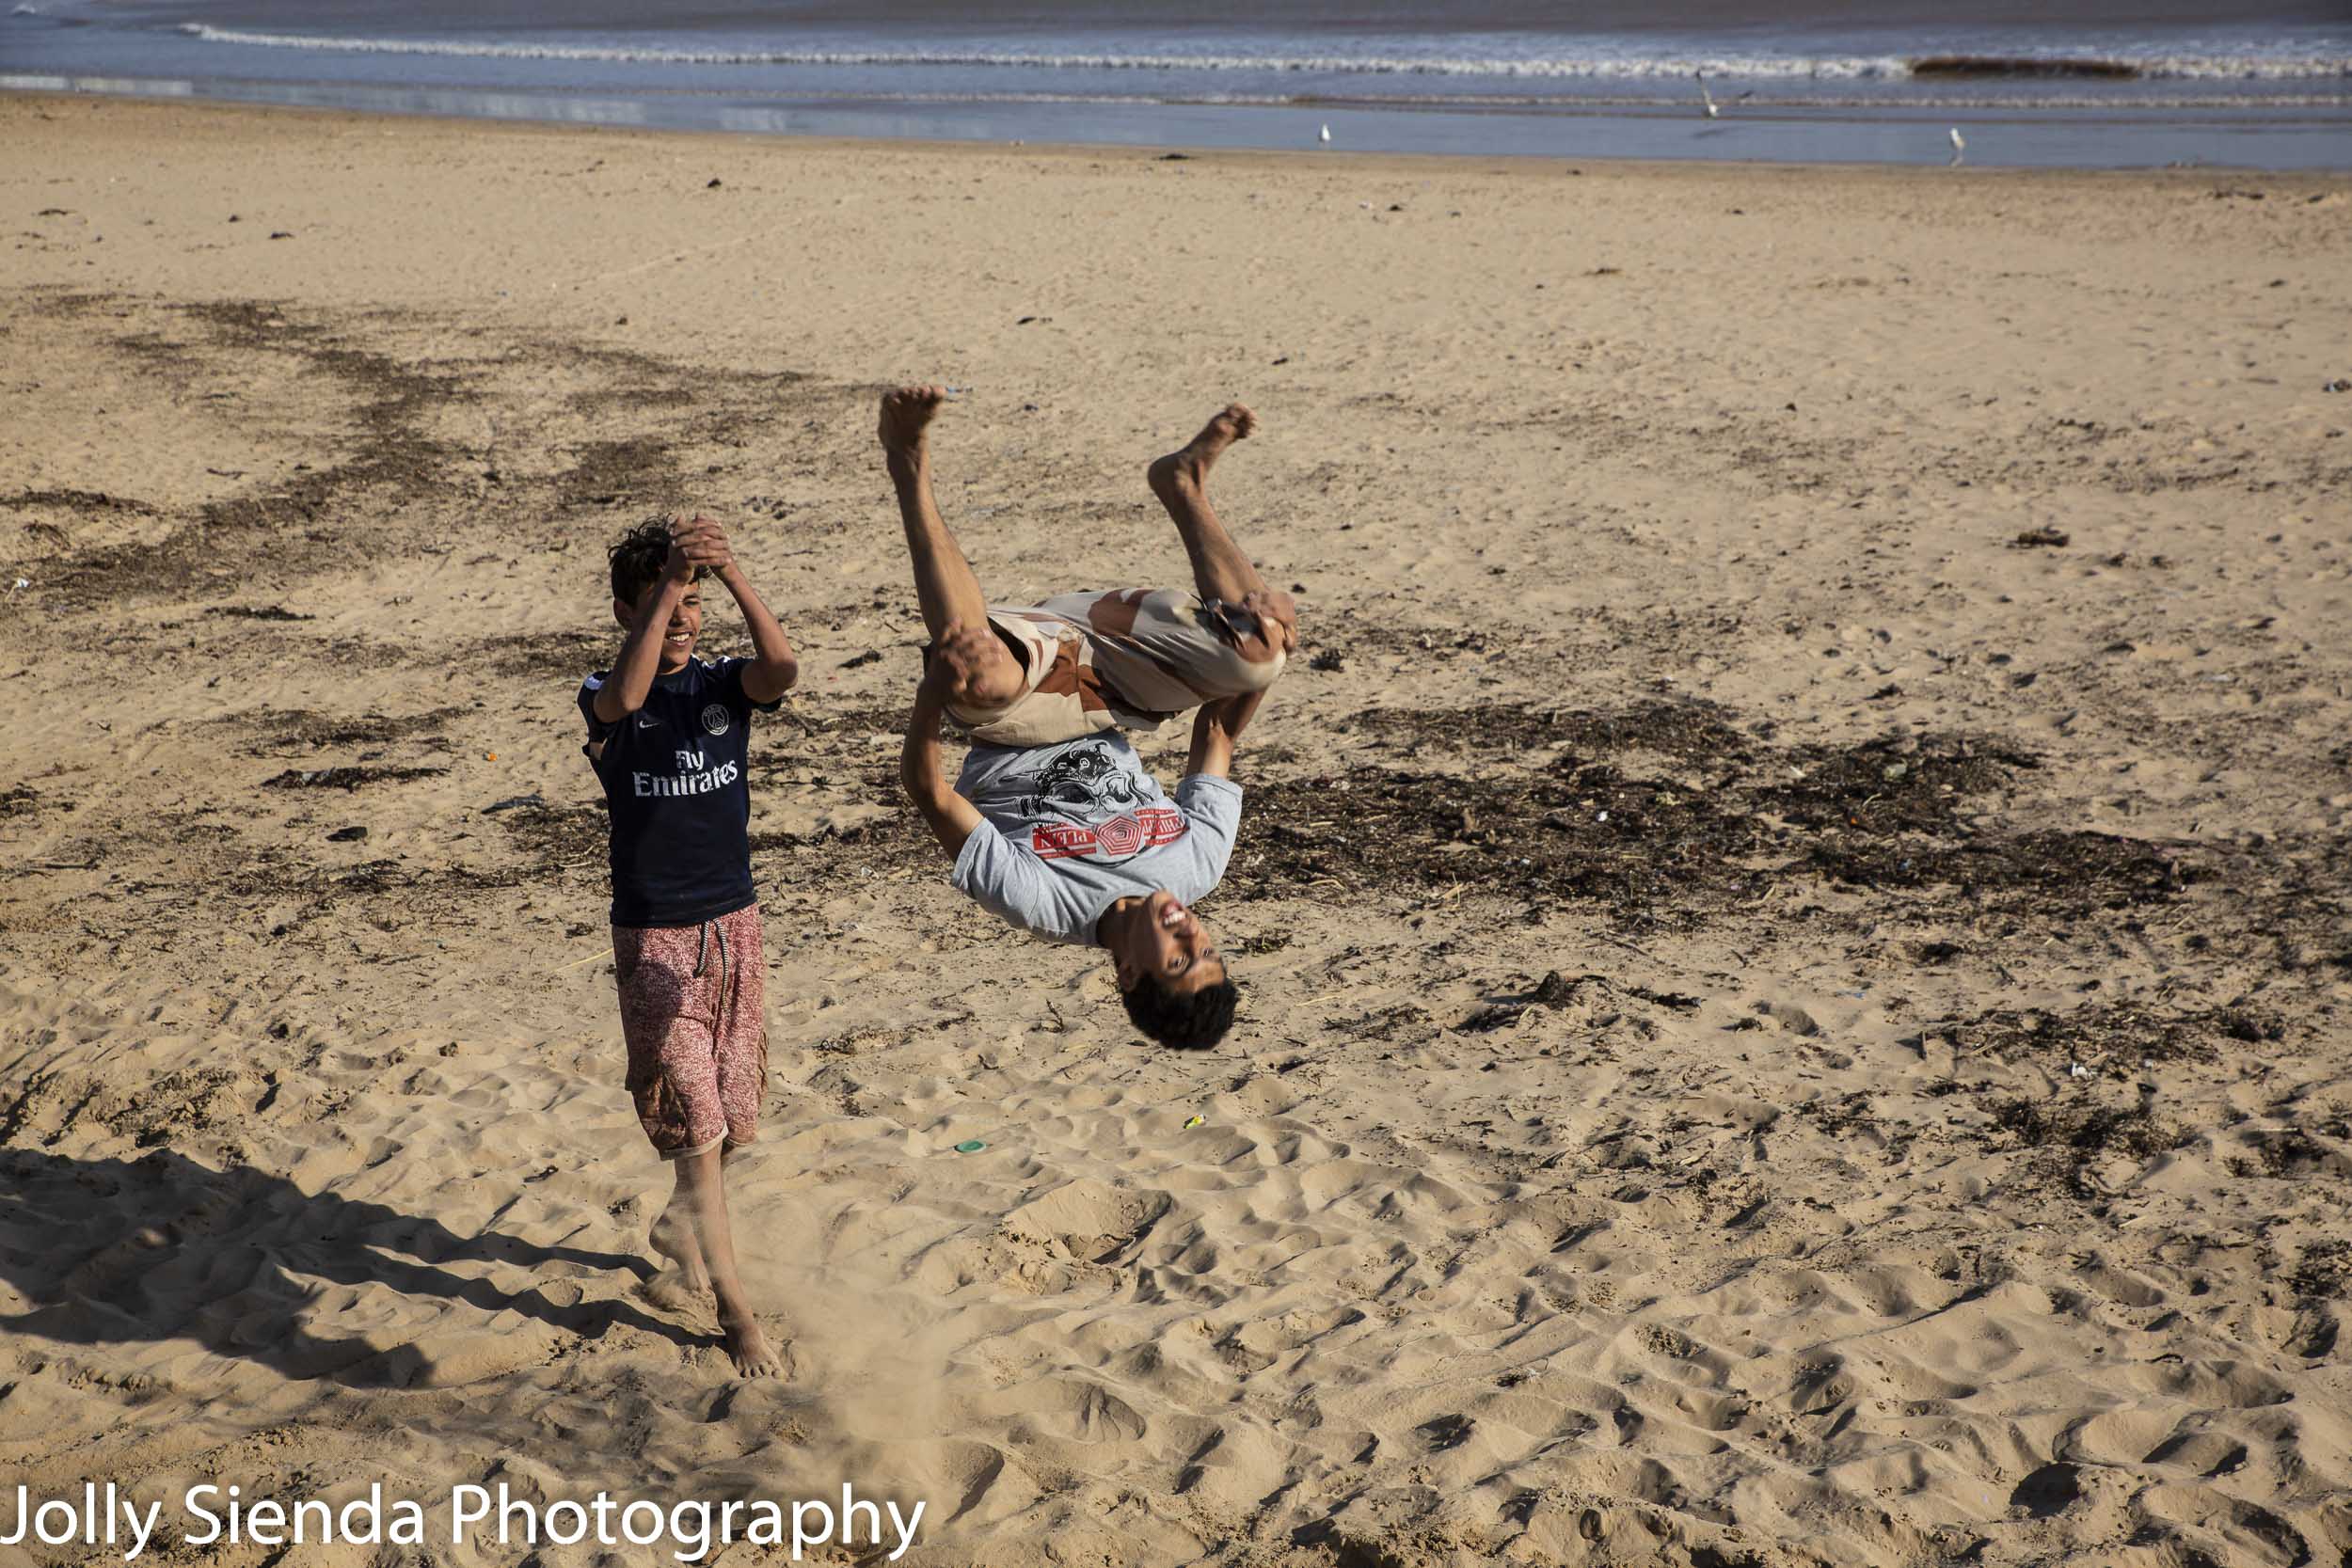 Men doing somersaults on the beach